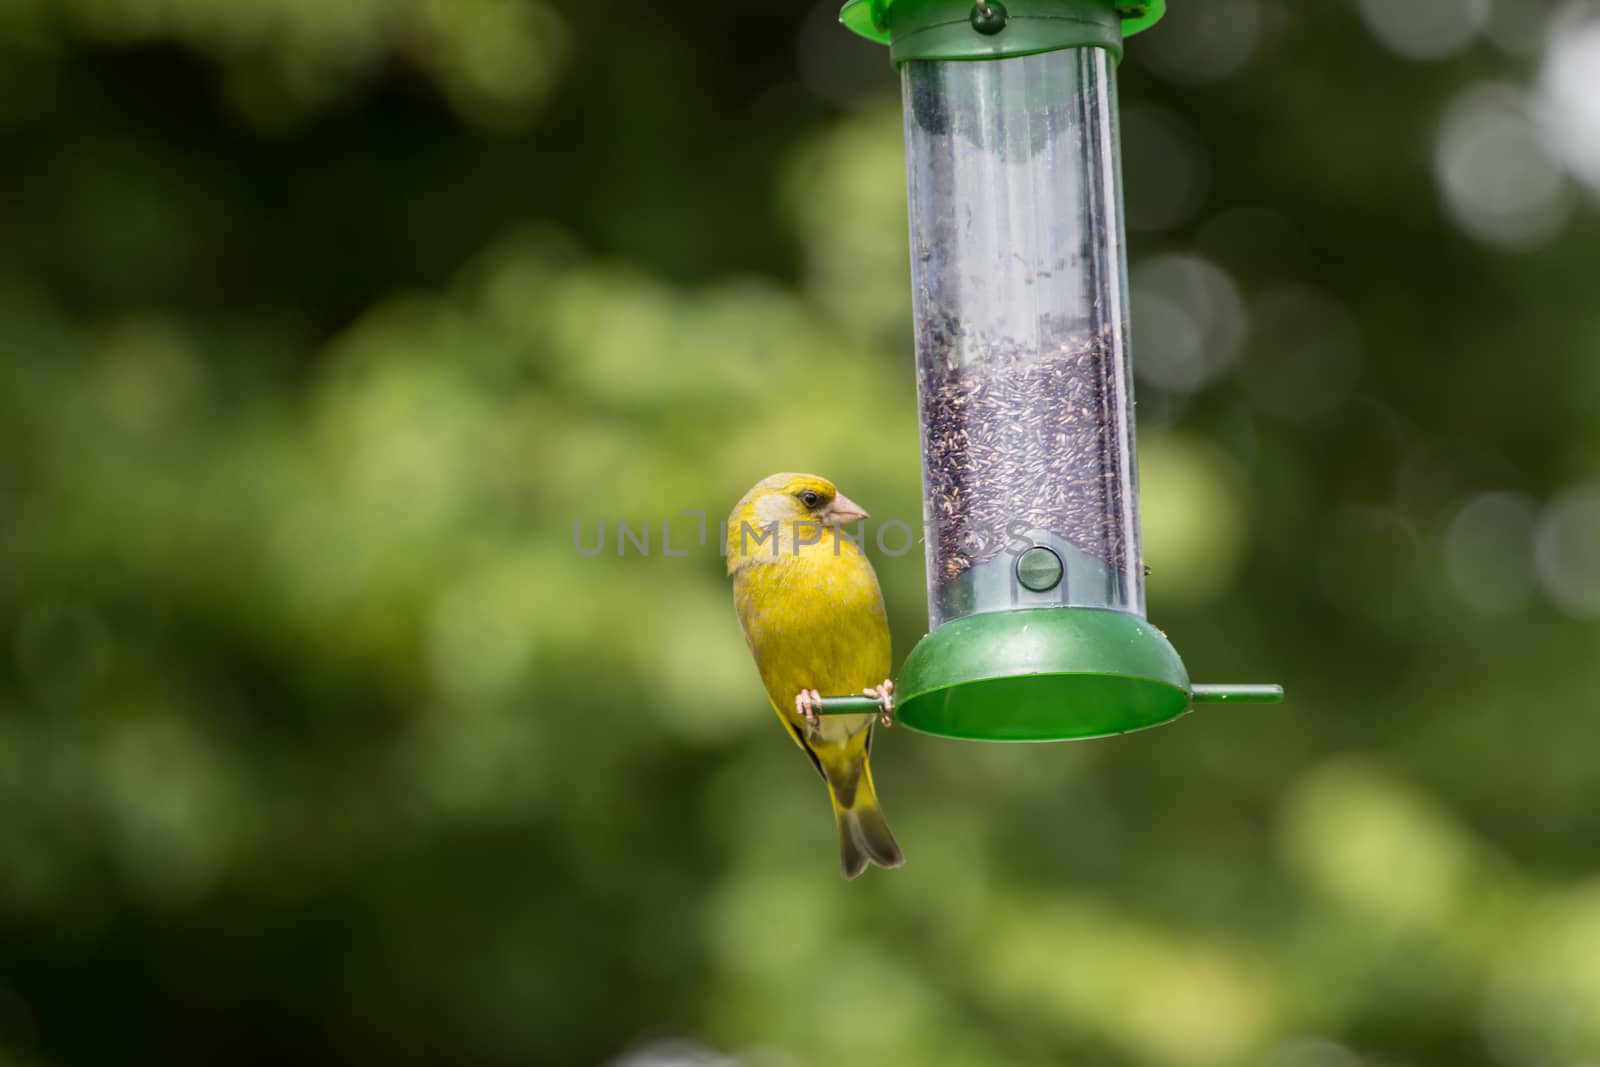 Greenfinch (Carduelis Chloris) feeding on nyjer seed from a feeder